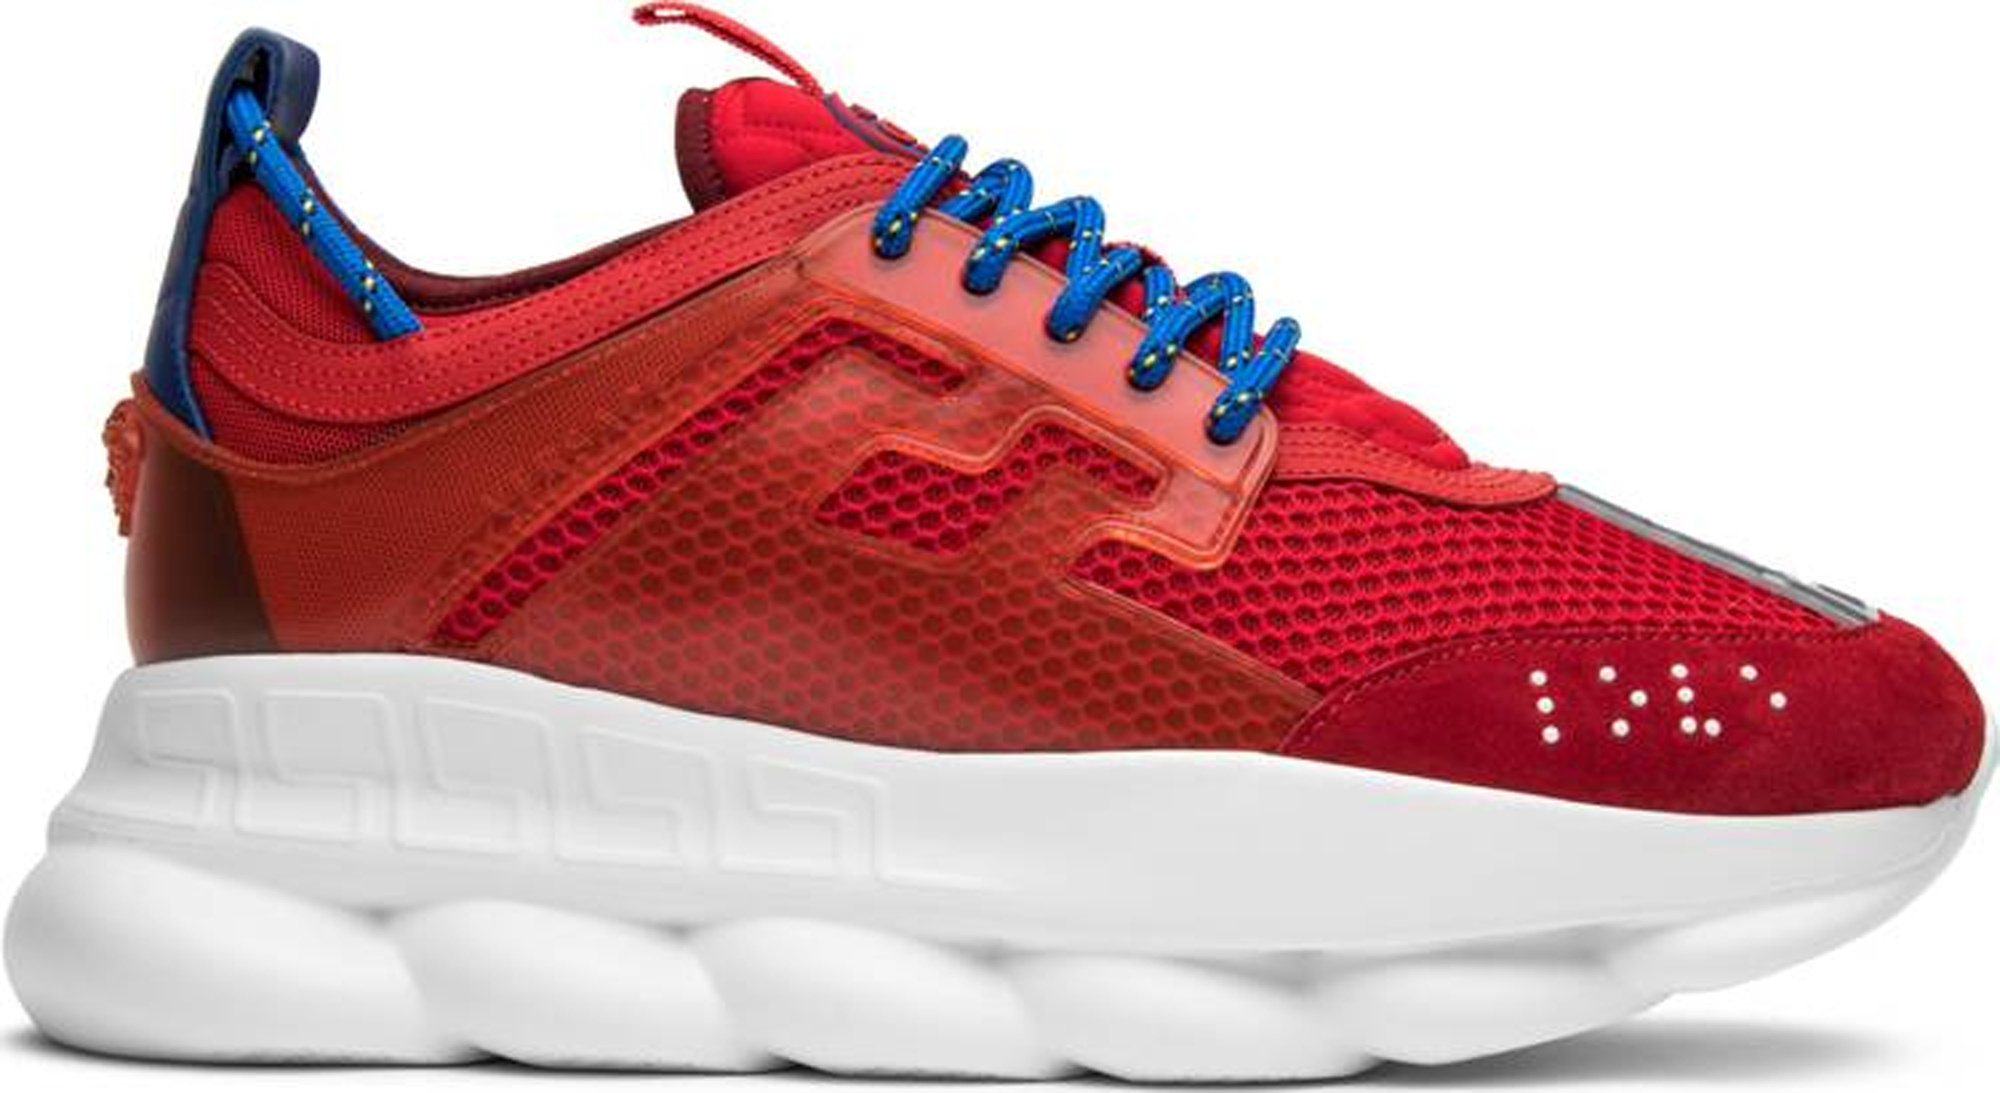 versace chain reaction red and blue